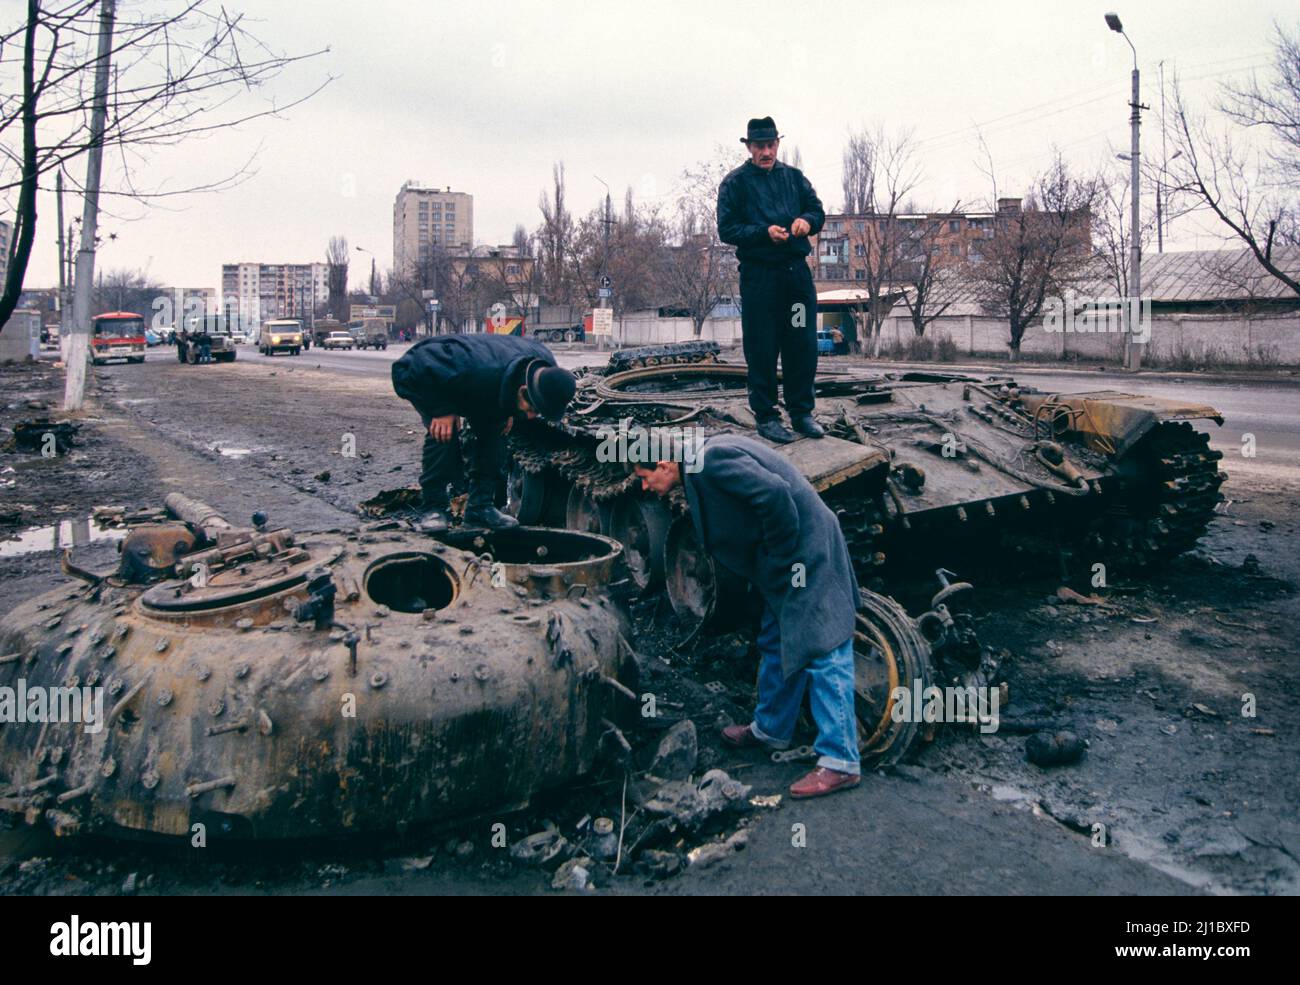 First Chechen War, November 1994.  Civilians look at a destroyed Russian T-72 tank on the street in Grozny, Chechnya. Stock Photo